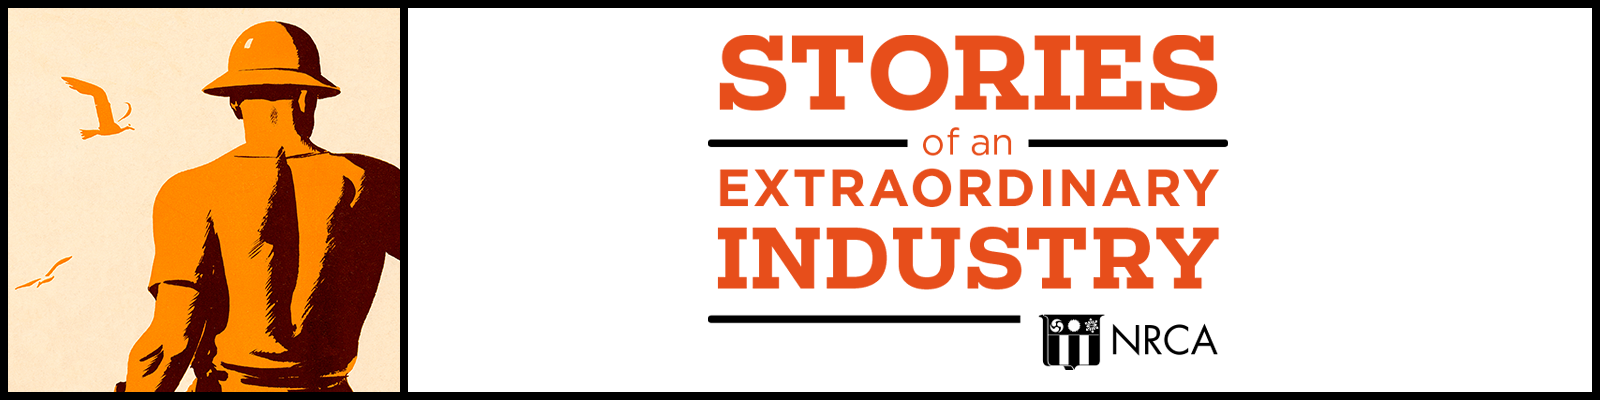 Stories of an Extraordinary Industry